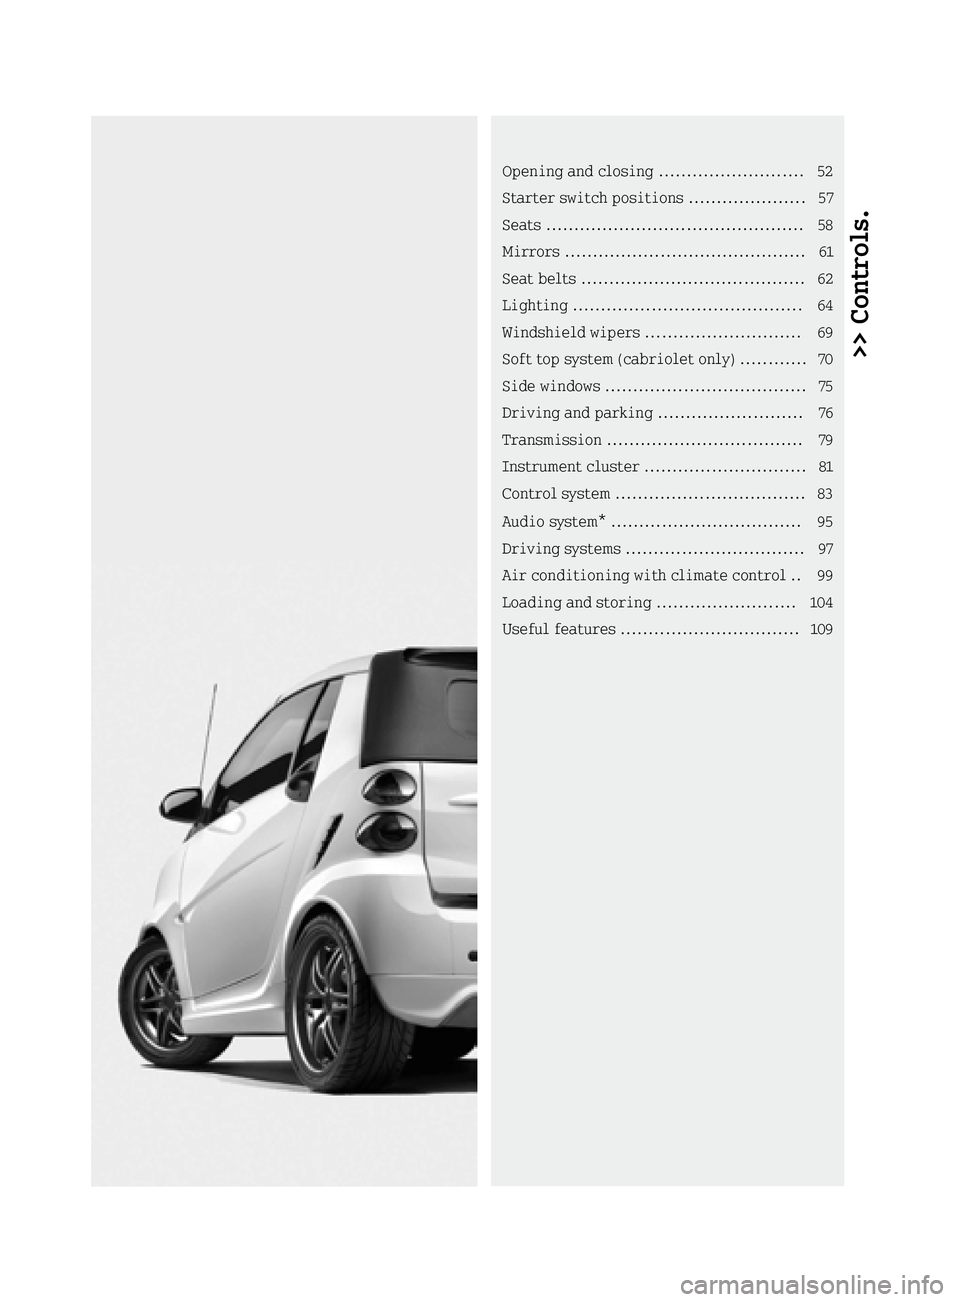 SMART FORTWO COUPE ELECTRIC DRIVE 2015 Workshop Manual >> Controls.Opening and closing .......................... 52
Starter switch positions ....................
.57
Seats .............................................. 58
Mirrors ........................